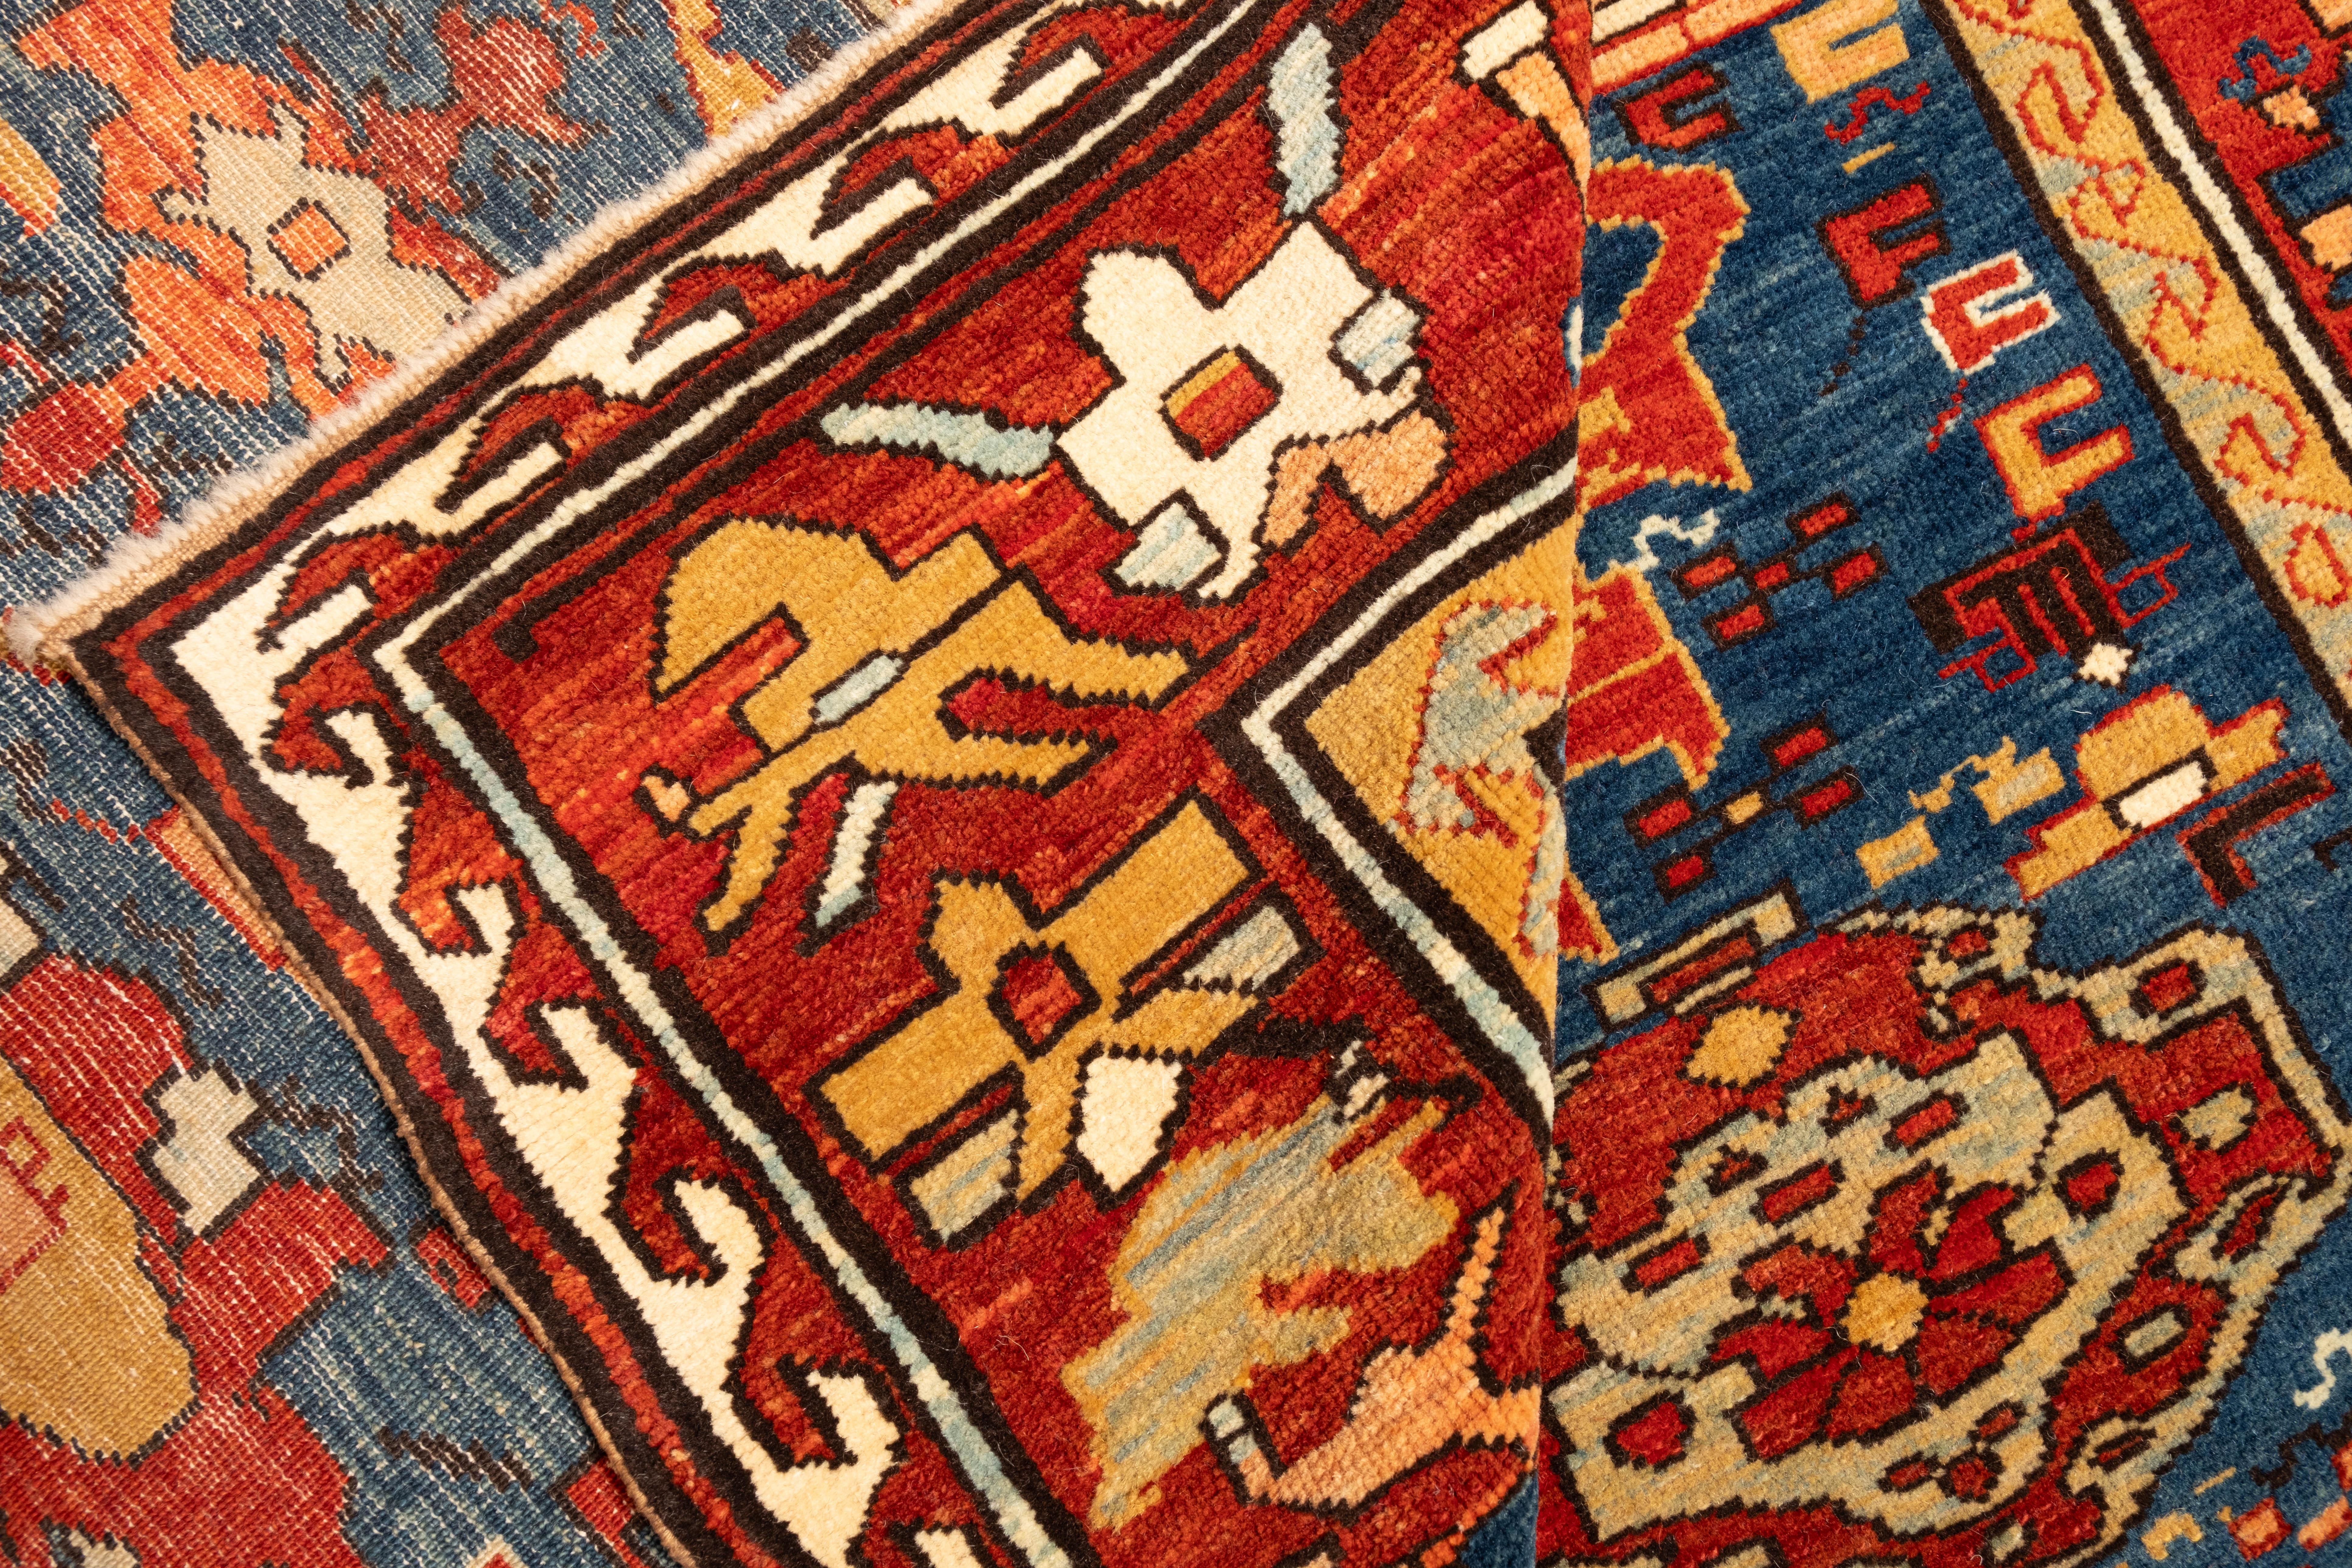 Ararat Rugs Palmettes and Flowers Lattice Rug Antique Revival Carpet Natural Dye In New Condition For Sale In Tokyo, JP